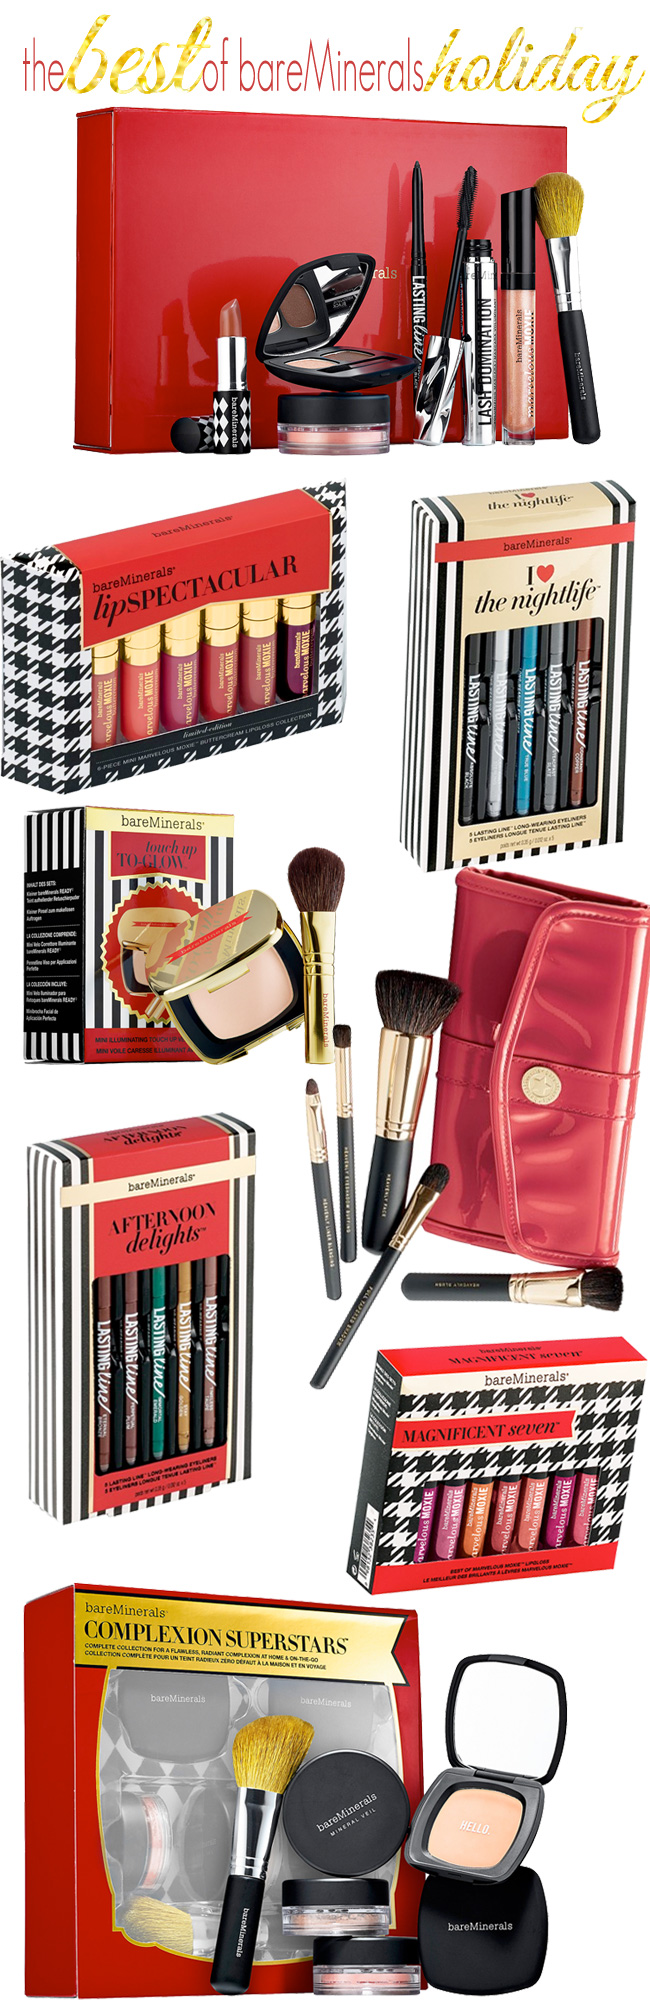 The best of bareMinerals beauty gifts for the holidays!